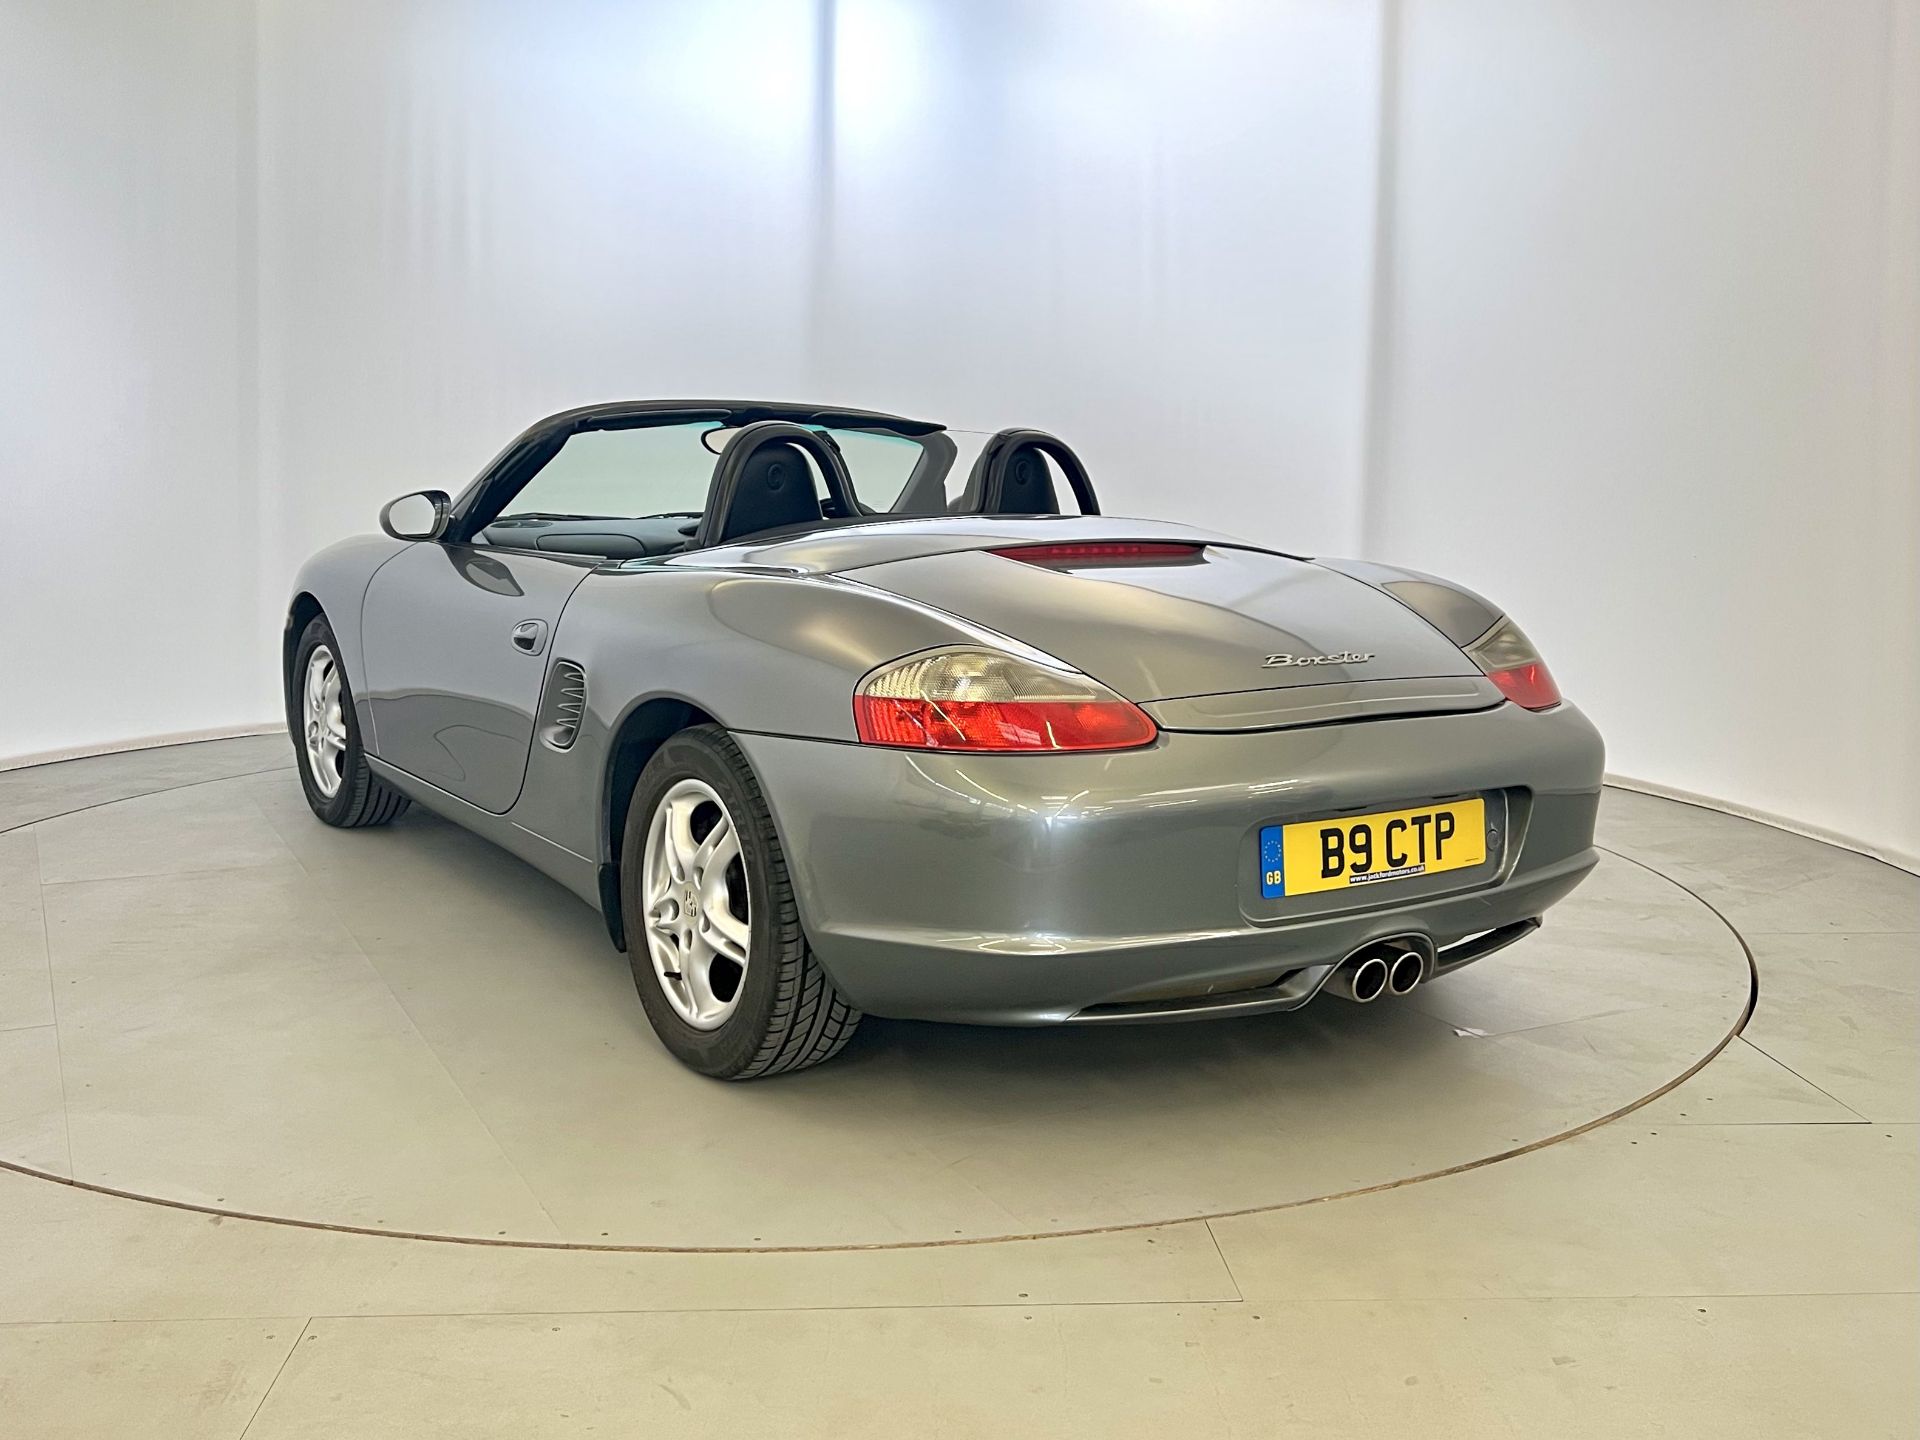 Porshe Boxster - Image 7 of 31